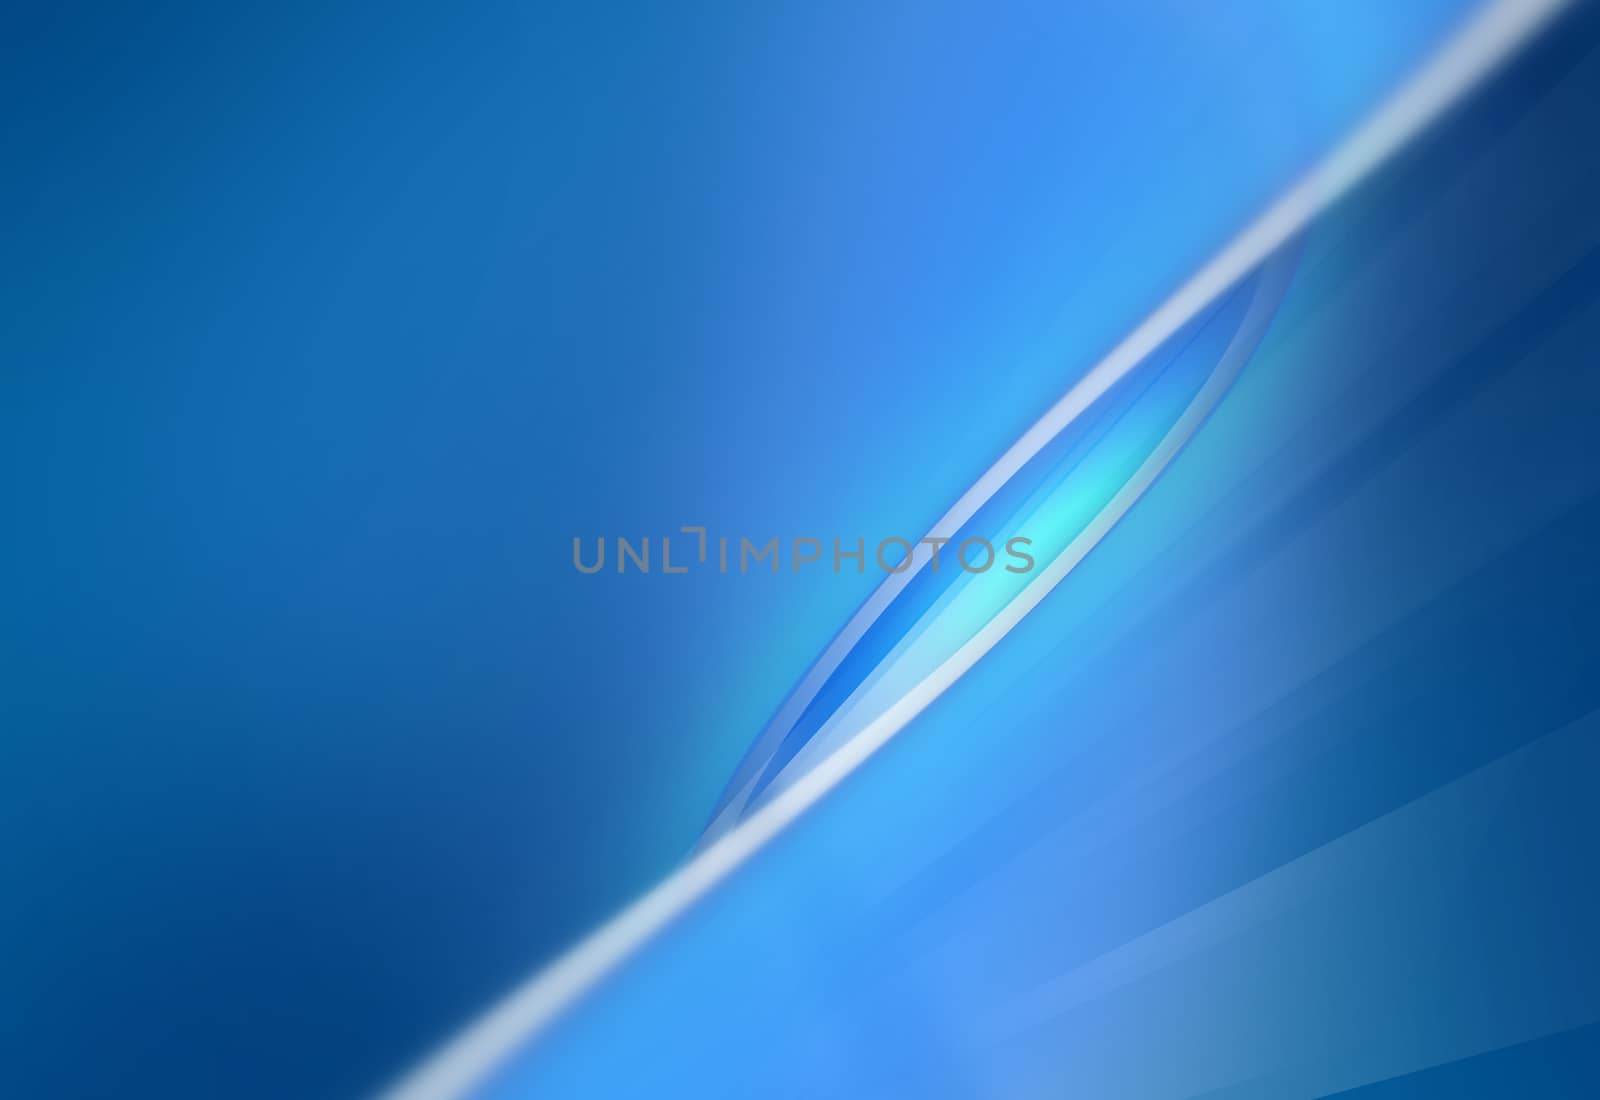 Abstract simple blue desktop background with  diagonal white curves.